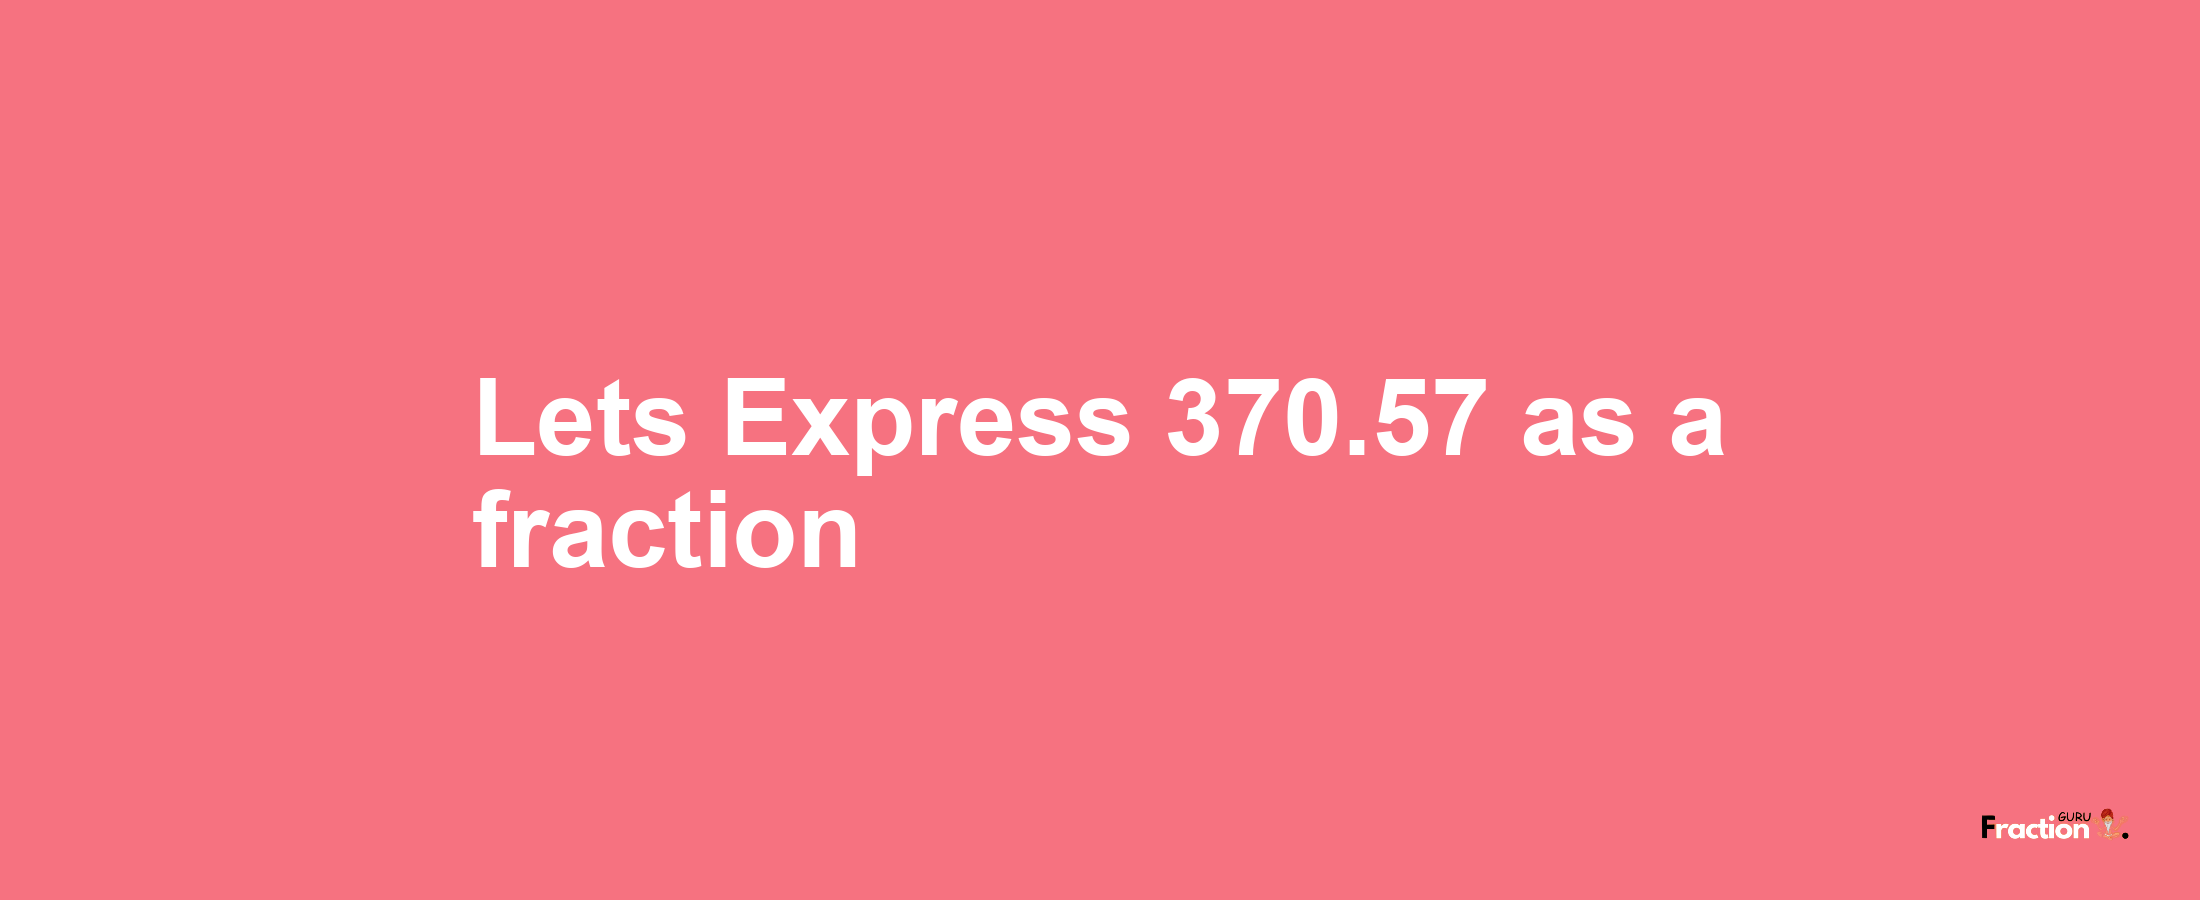 Lets Express 370.57 as afraction